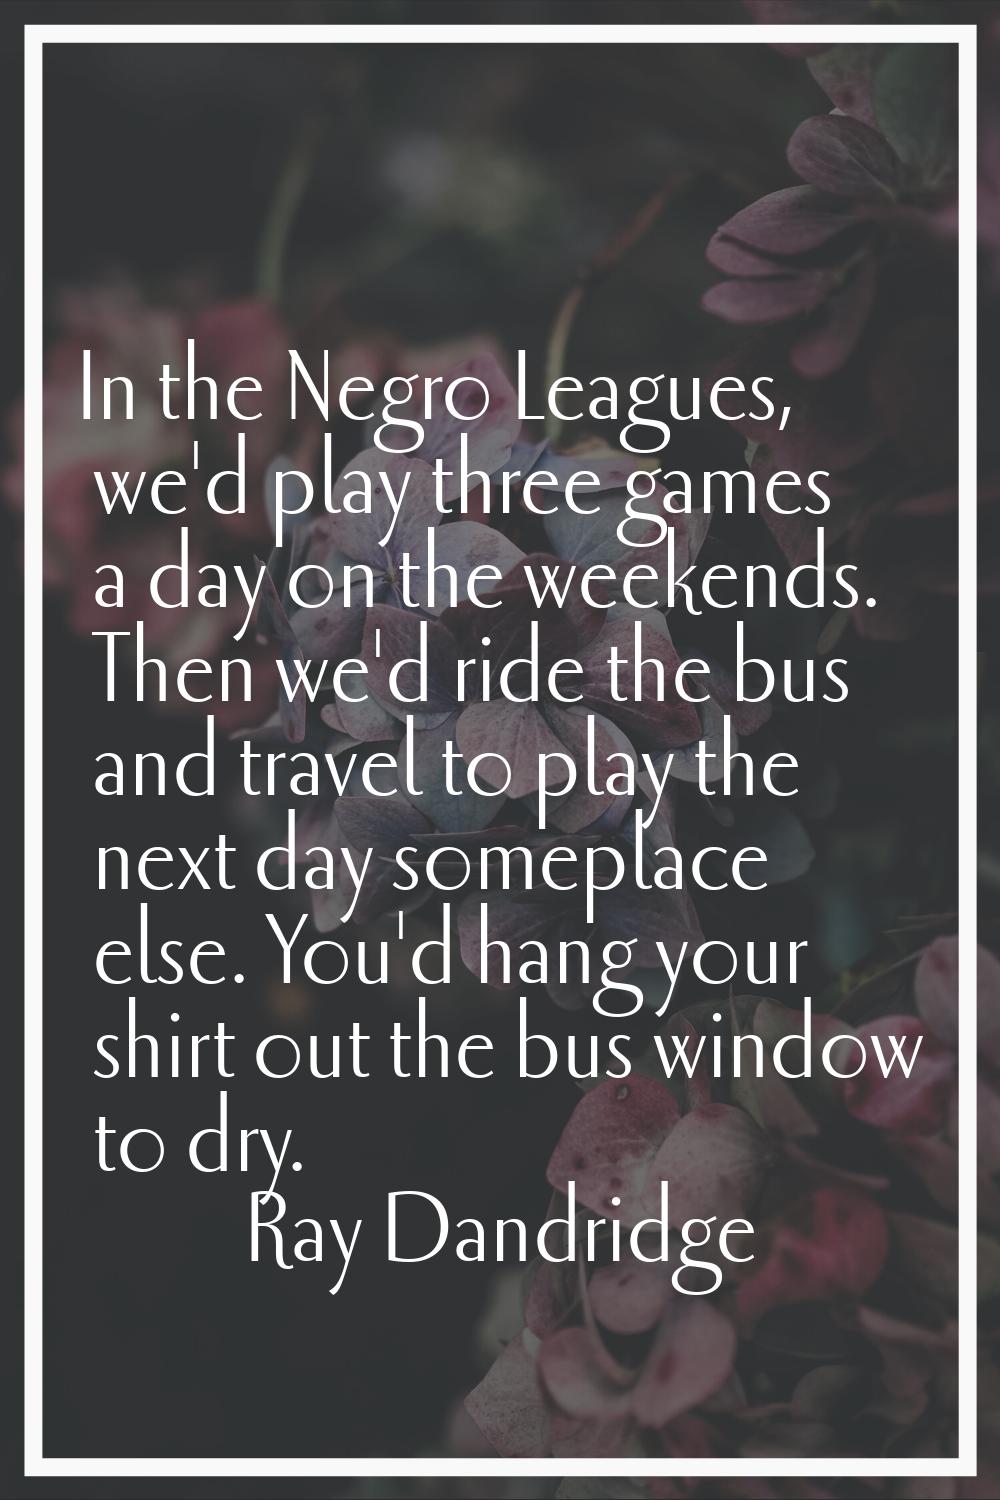 In the Negro Leagues, we'd play three games a day on the weekends. Then we'd ride the bus and trave